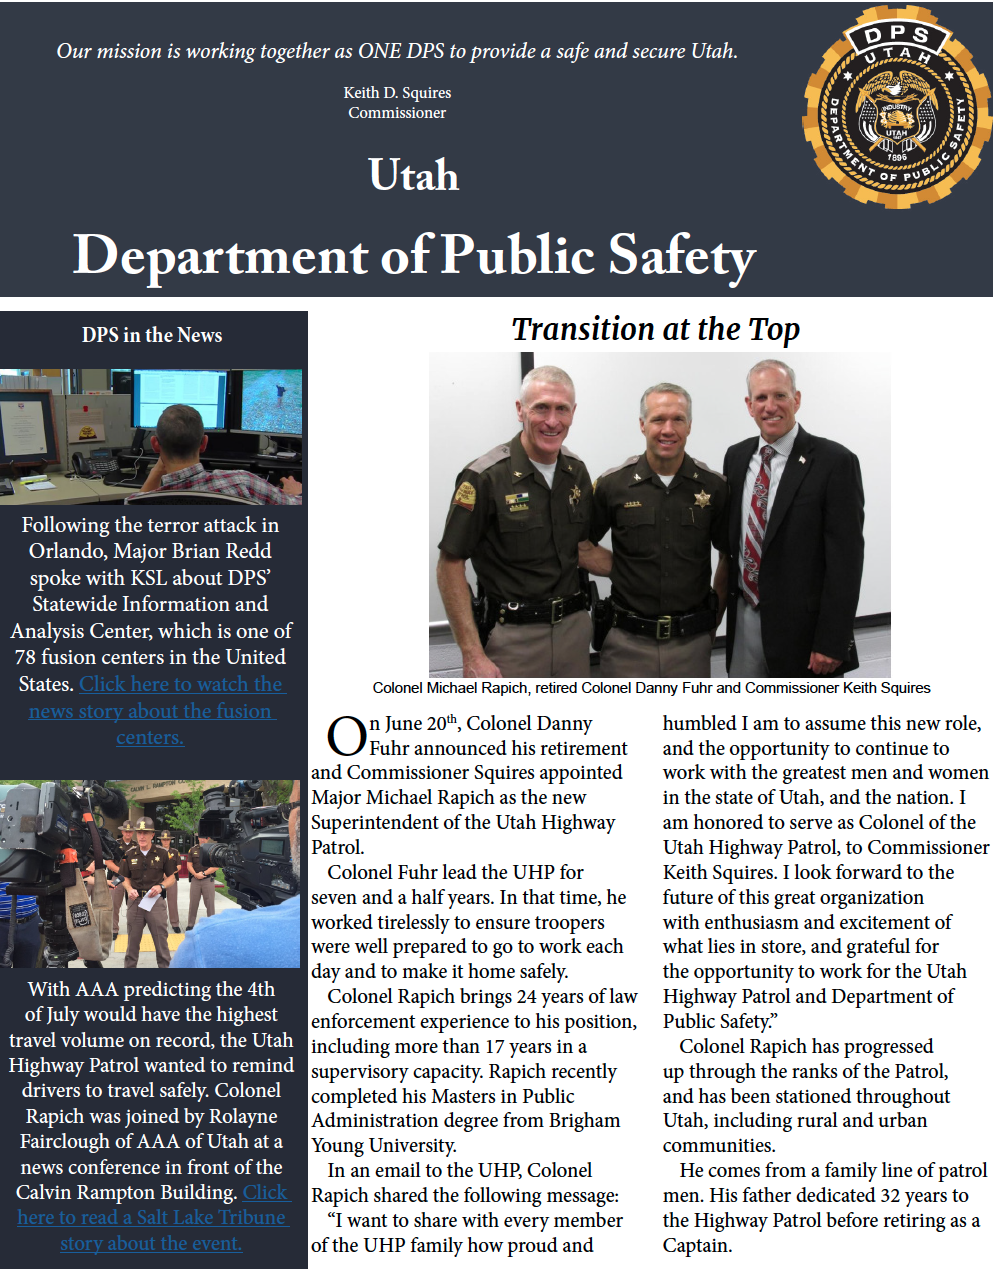 Screen cap of the front of the DPS June Highlights